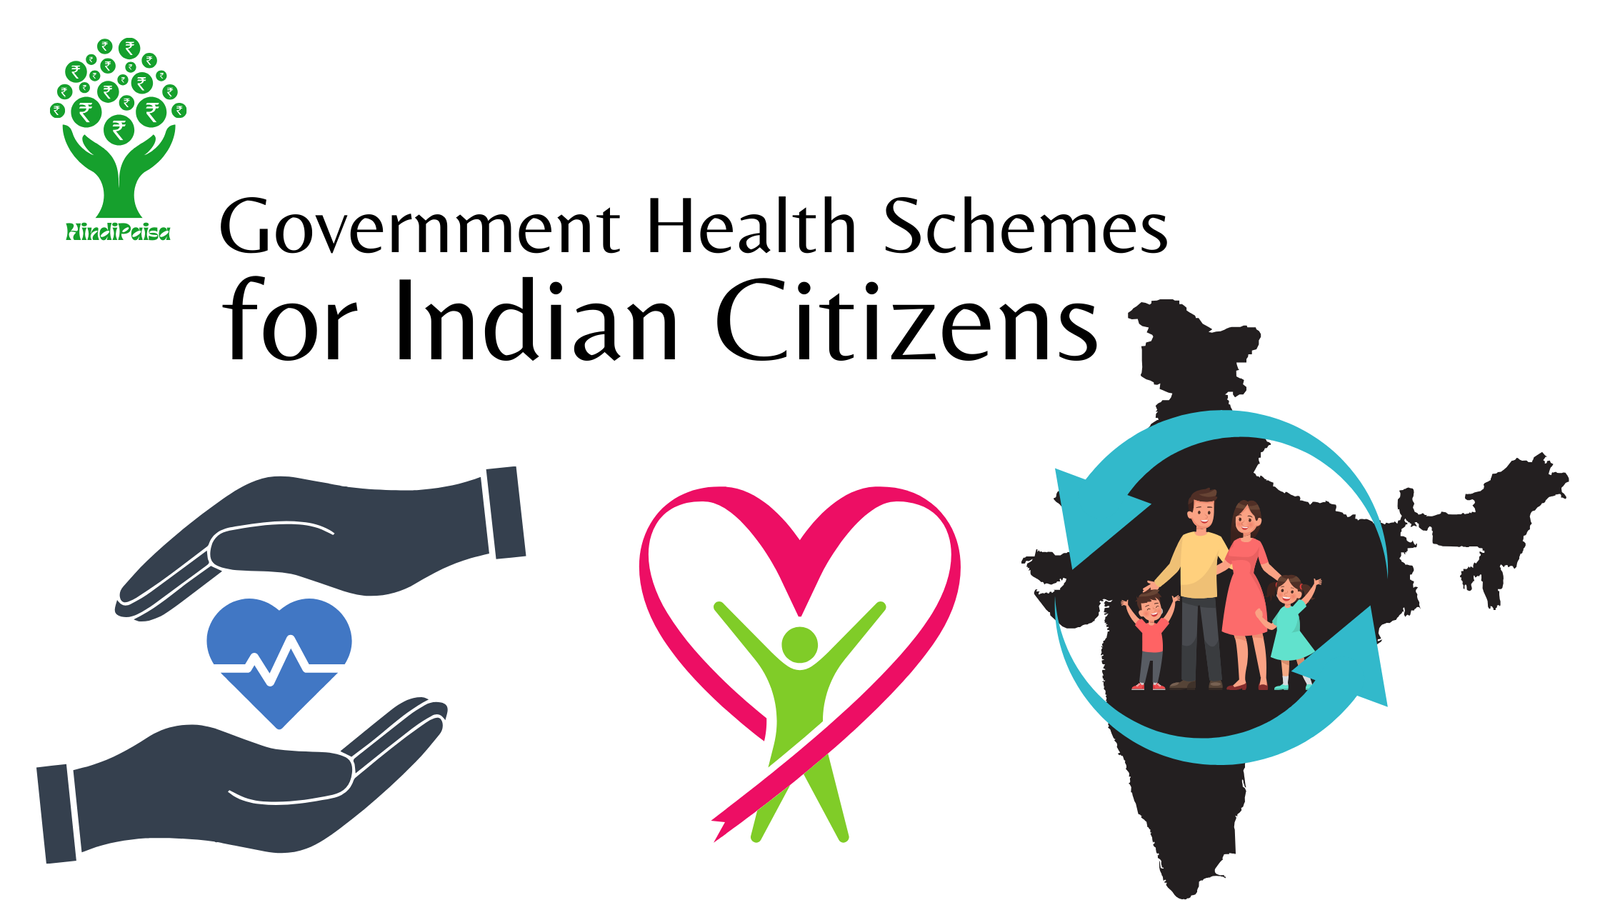 Government Health Schemes for Indian Citizens